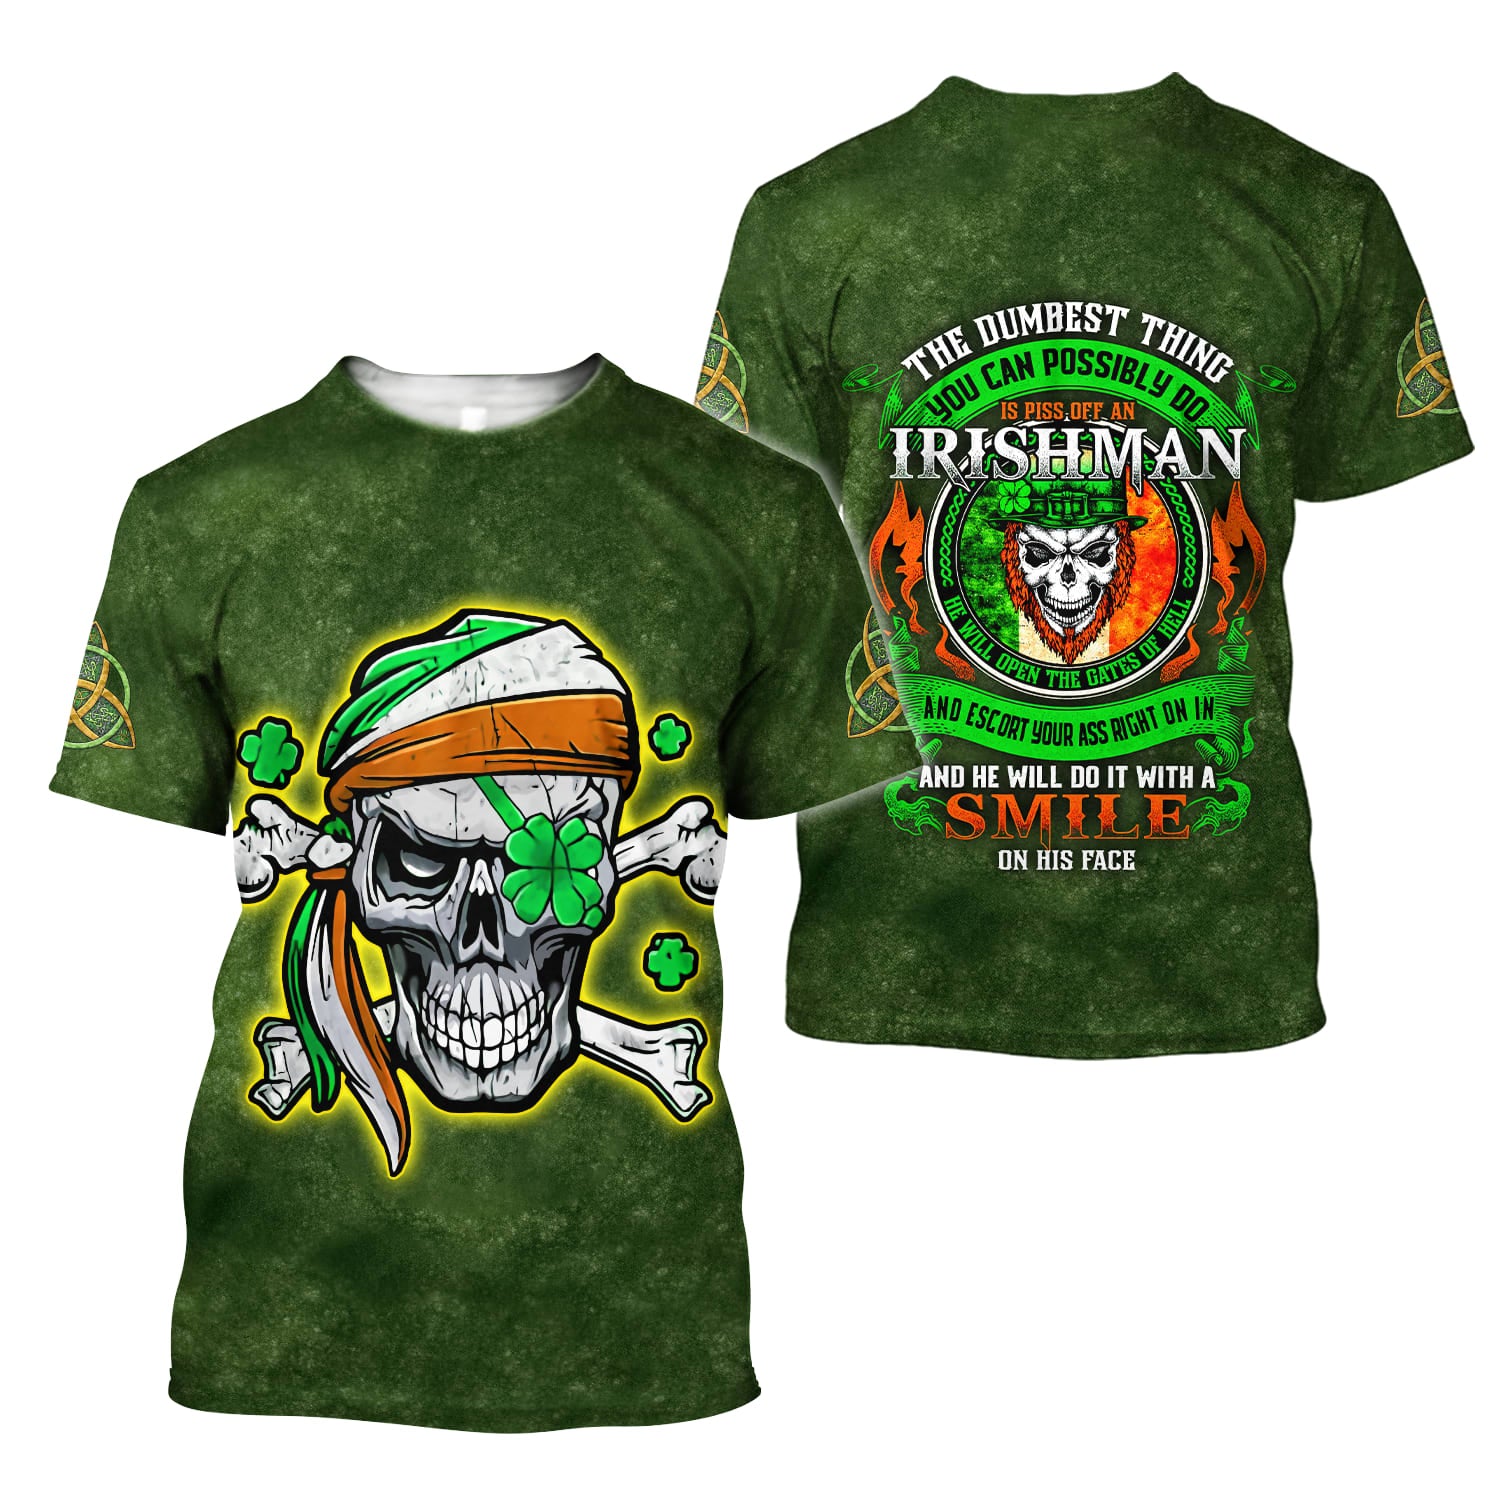 The Dumbest Thing You Can Possibly 3d T Shirt - Irish St Patrick Day Shirt 3d Print - St Patricks Day 3D Shirts for Men & Women